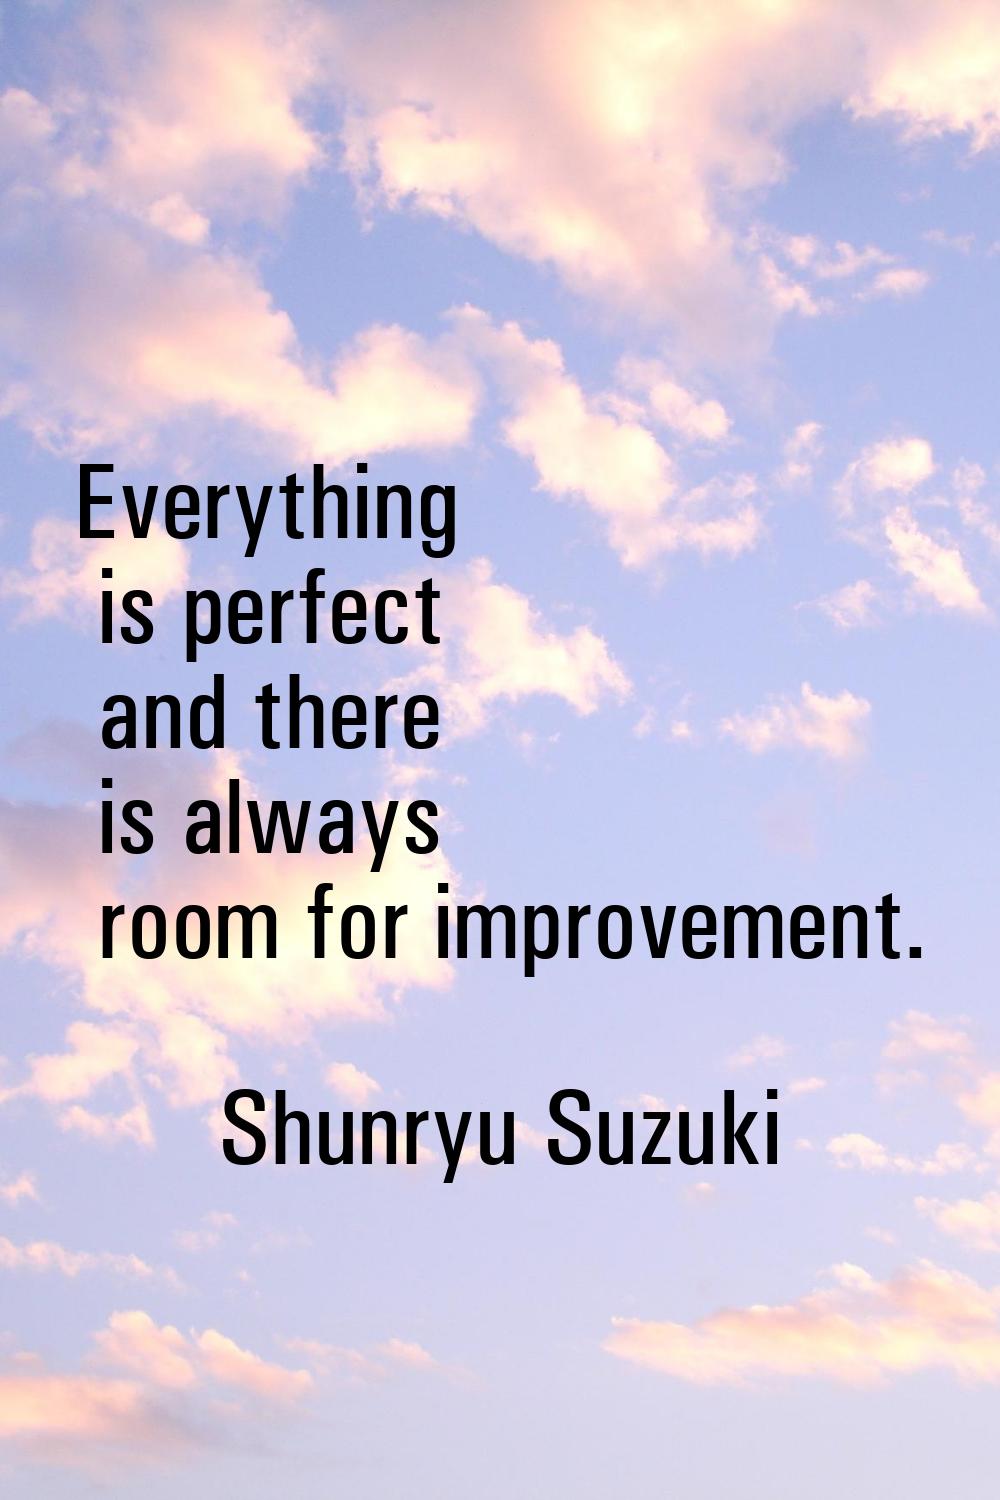 Everything is perfect and there is always room for improvement.